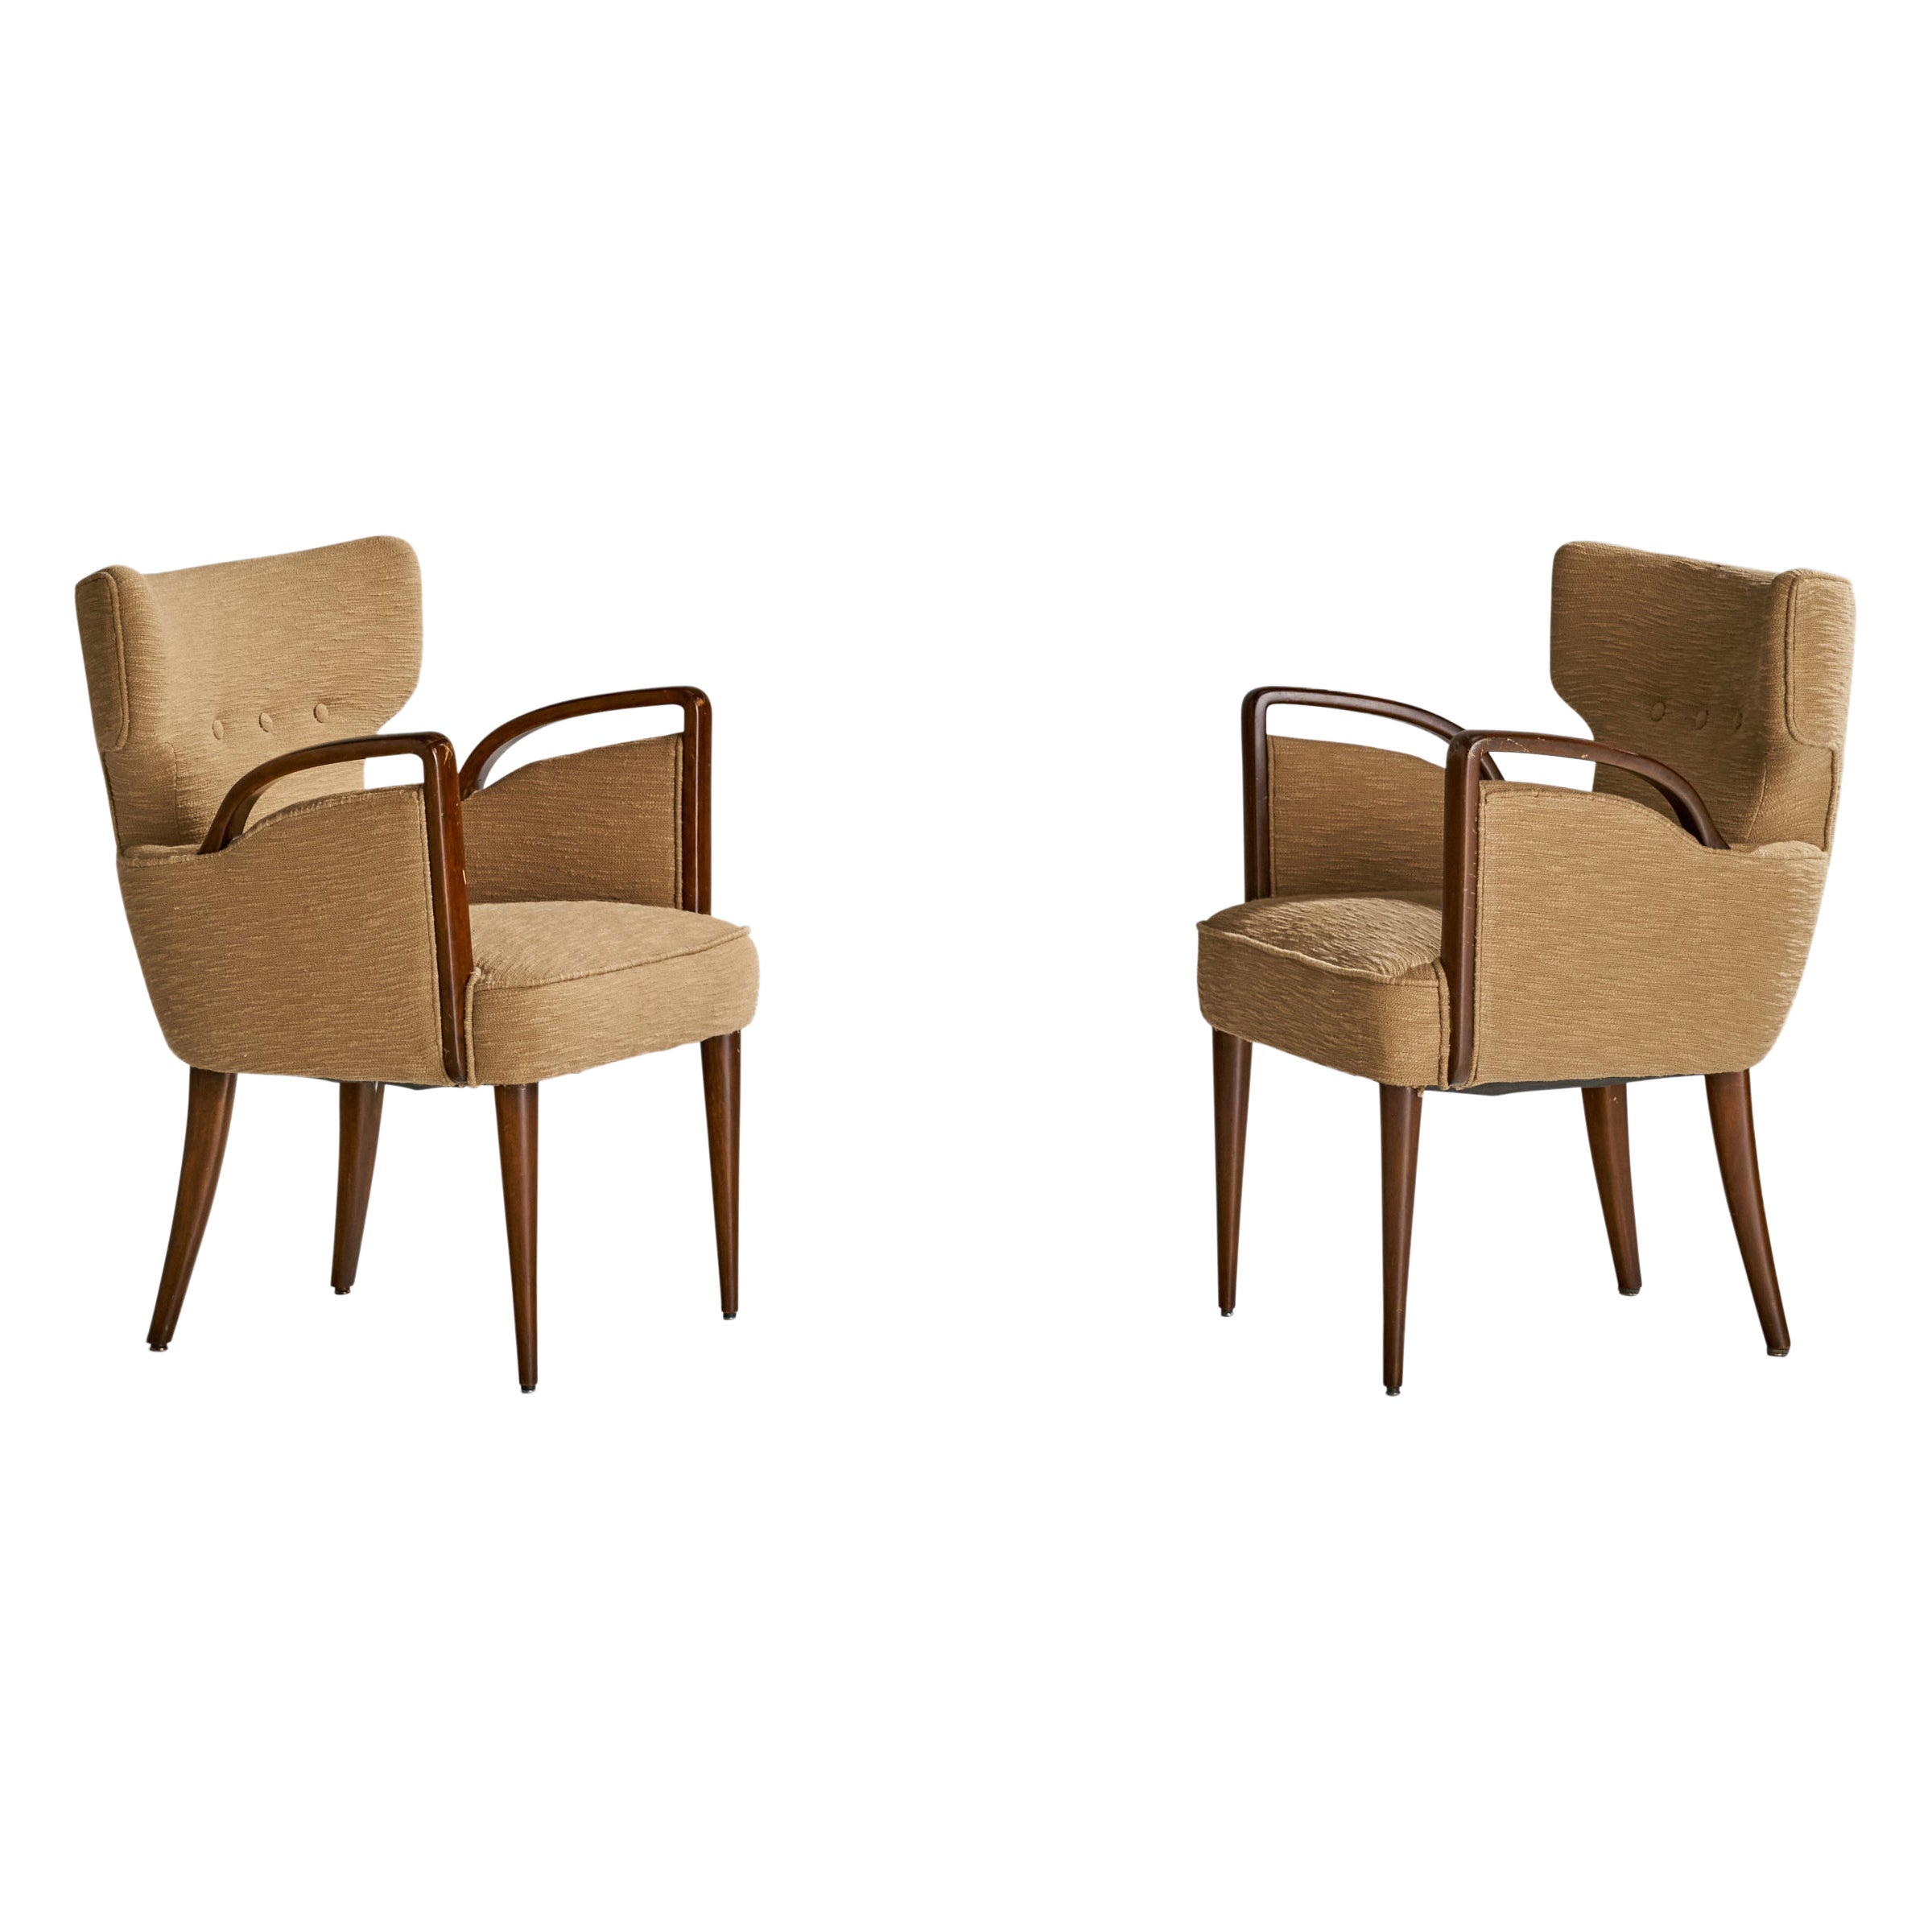 Melchiorre Bega, Armchairs, Fabric, Wood, Italy, 1949 For Sale